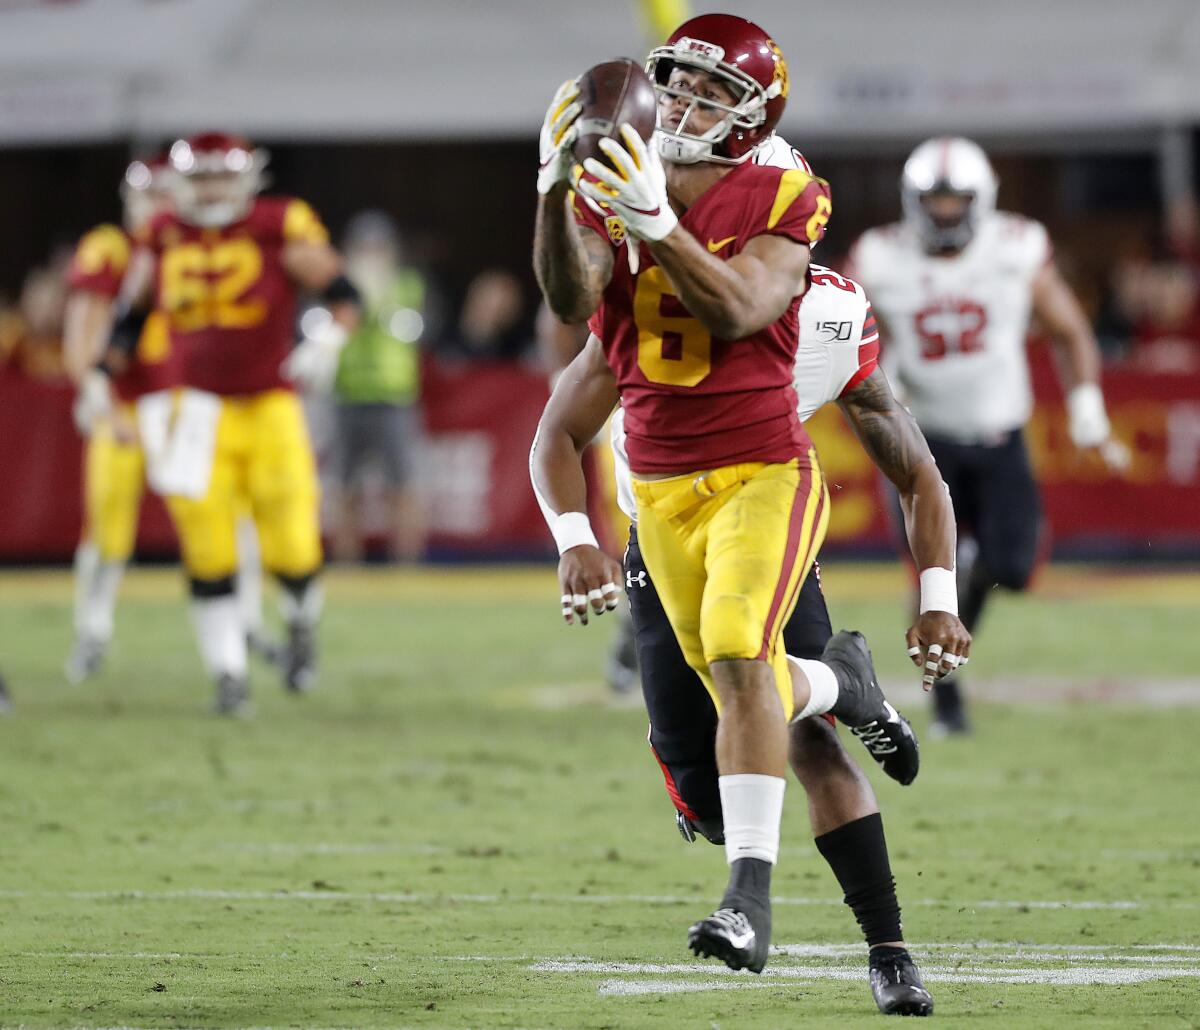 USC wide receiver Michael Pittman makes a big catch against Utah in the fourth quarter at the Coliseum on Friday.